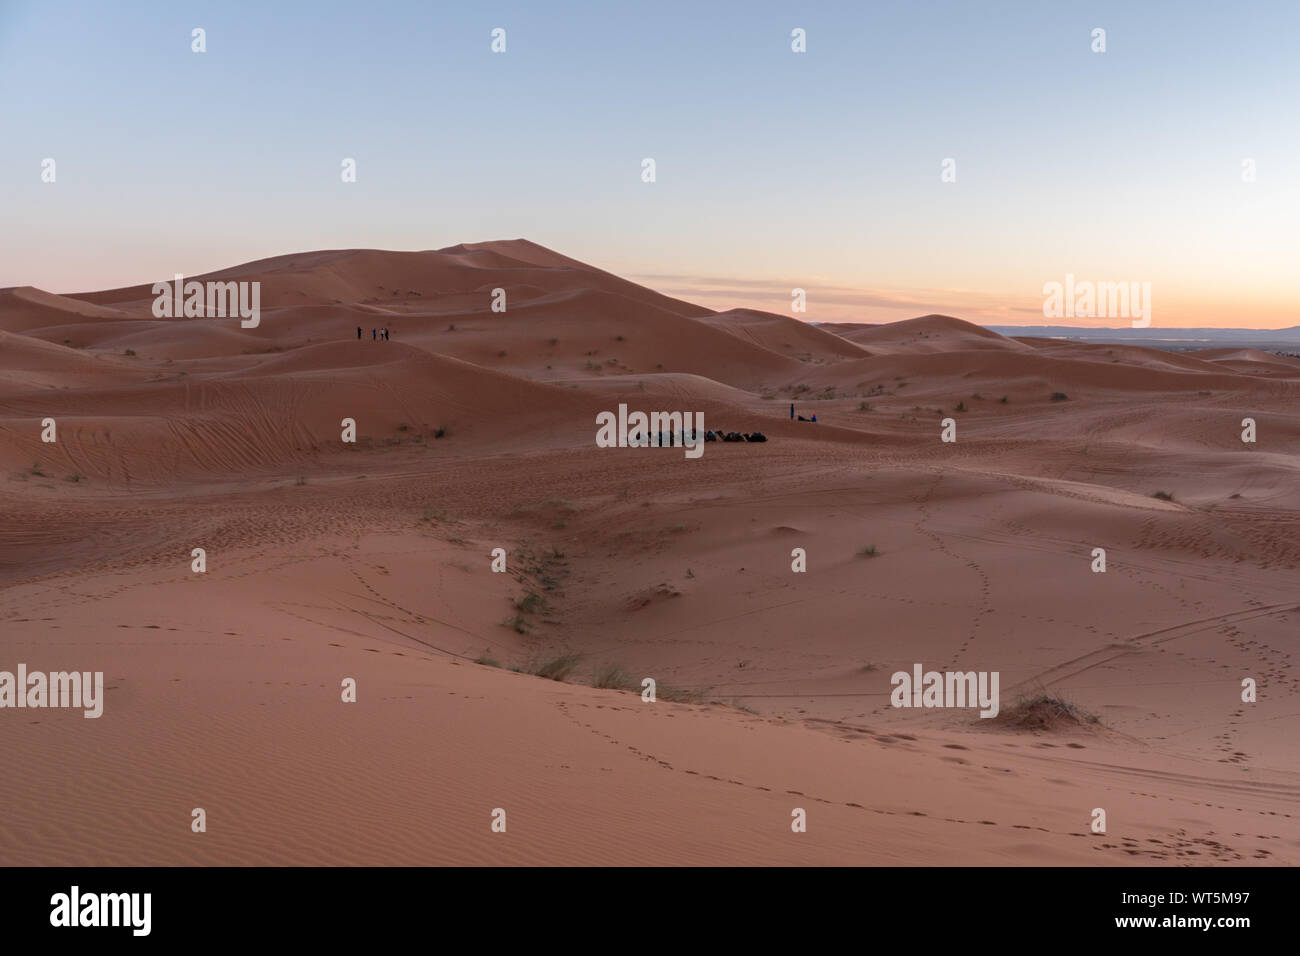 Gorgeous and scenic desert scene with the moon crescent high above beautiful sand dunes Erg Chebbi, Morocco, Merzouga Stock Photo